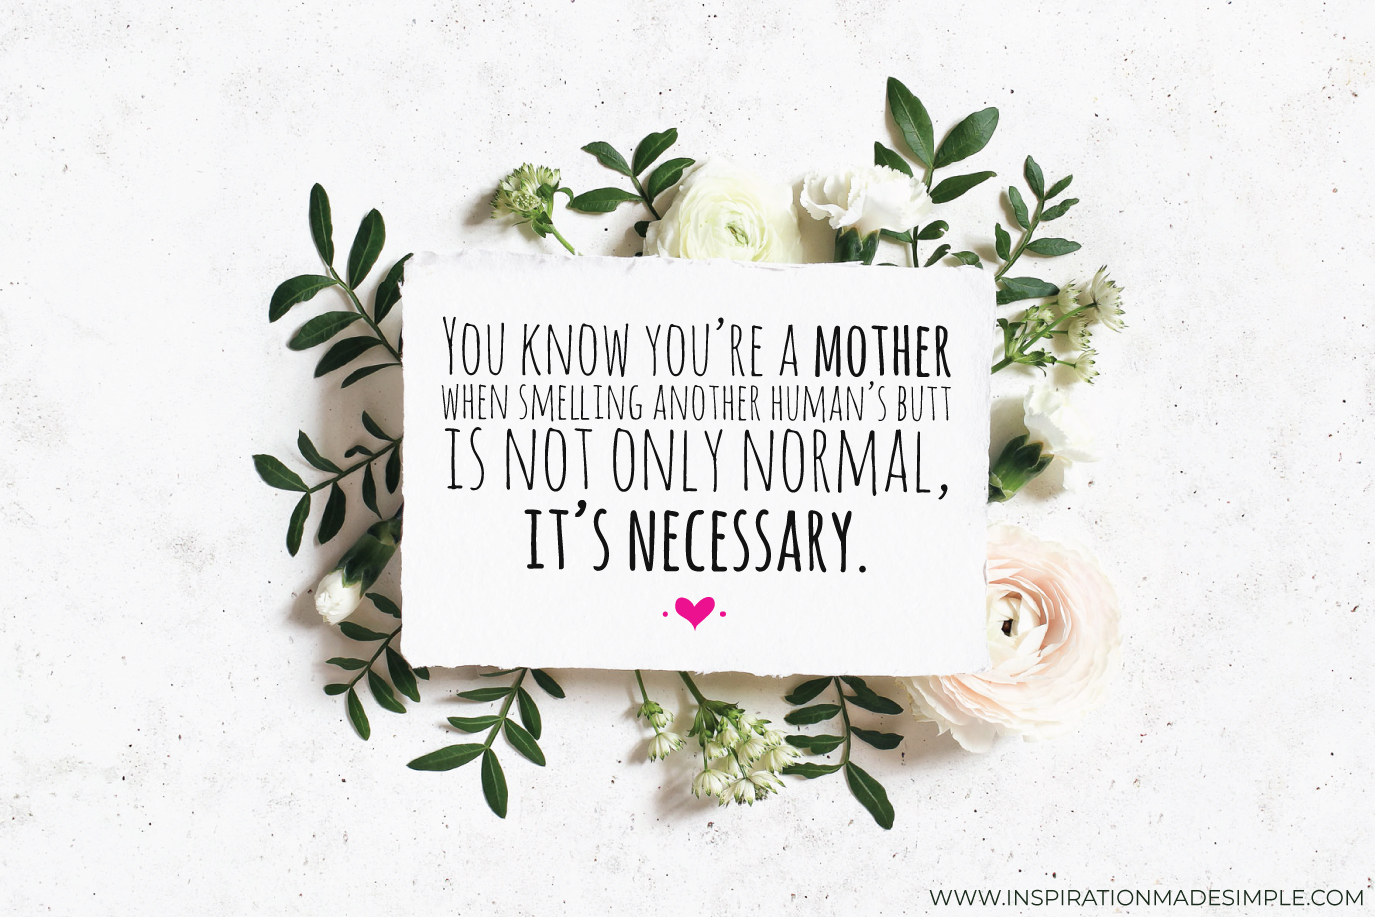 Funny Printable Mother's Day Cards - Inspiration Made Simple